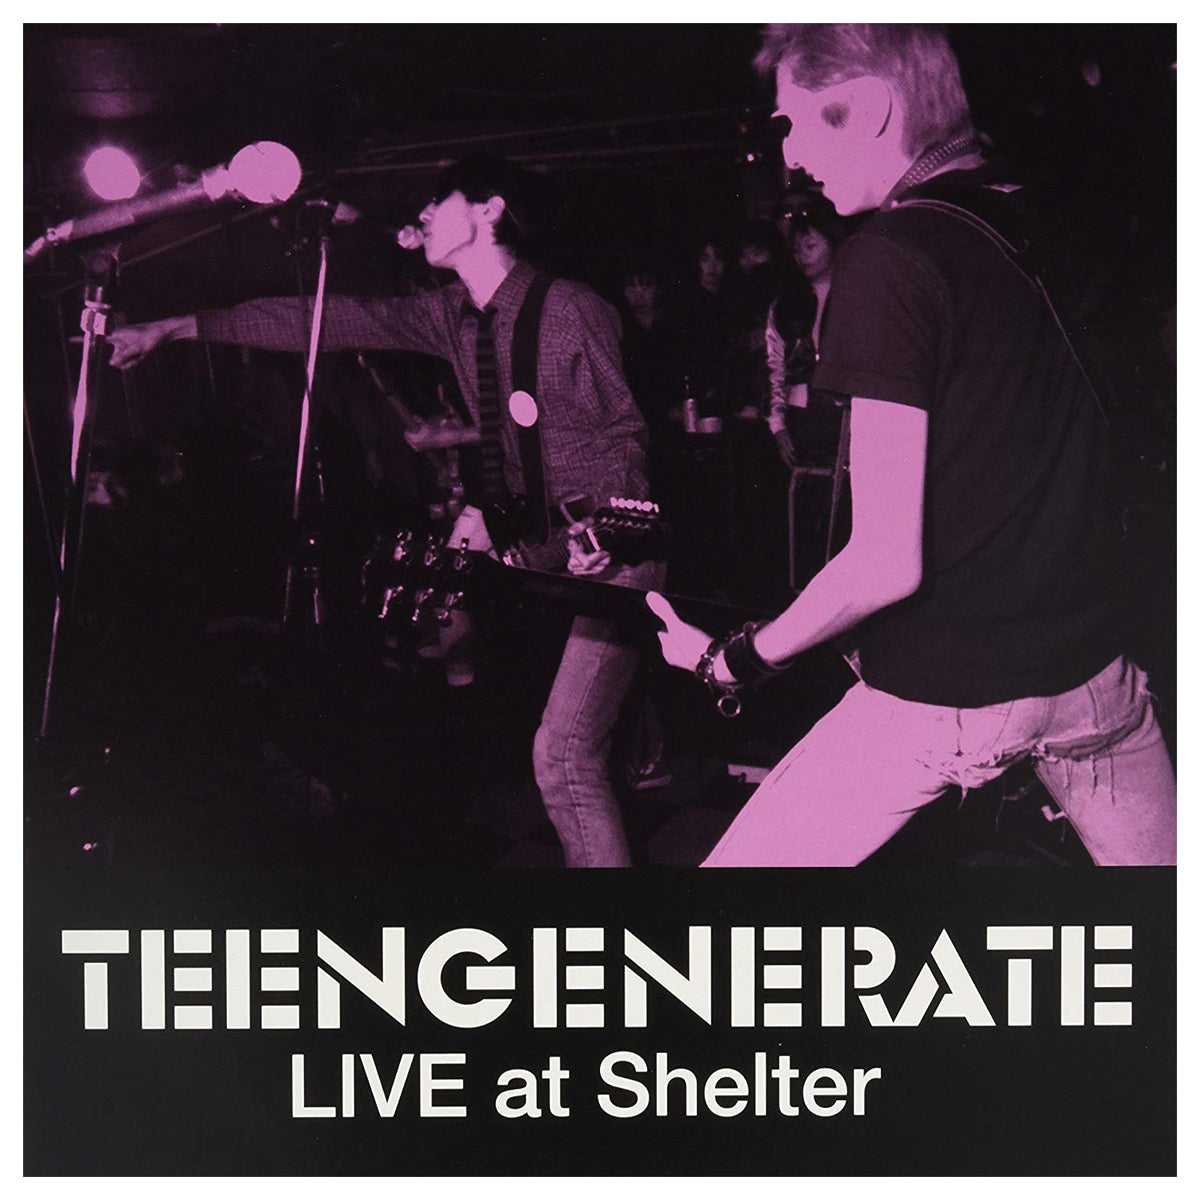 Teengenerate- Live At Shelter LP ~REISSUE!